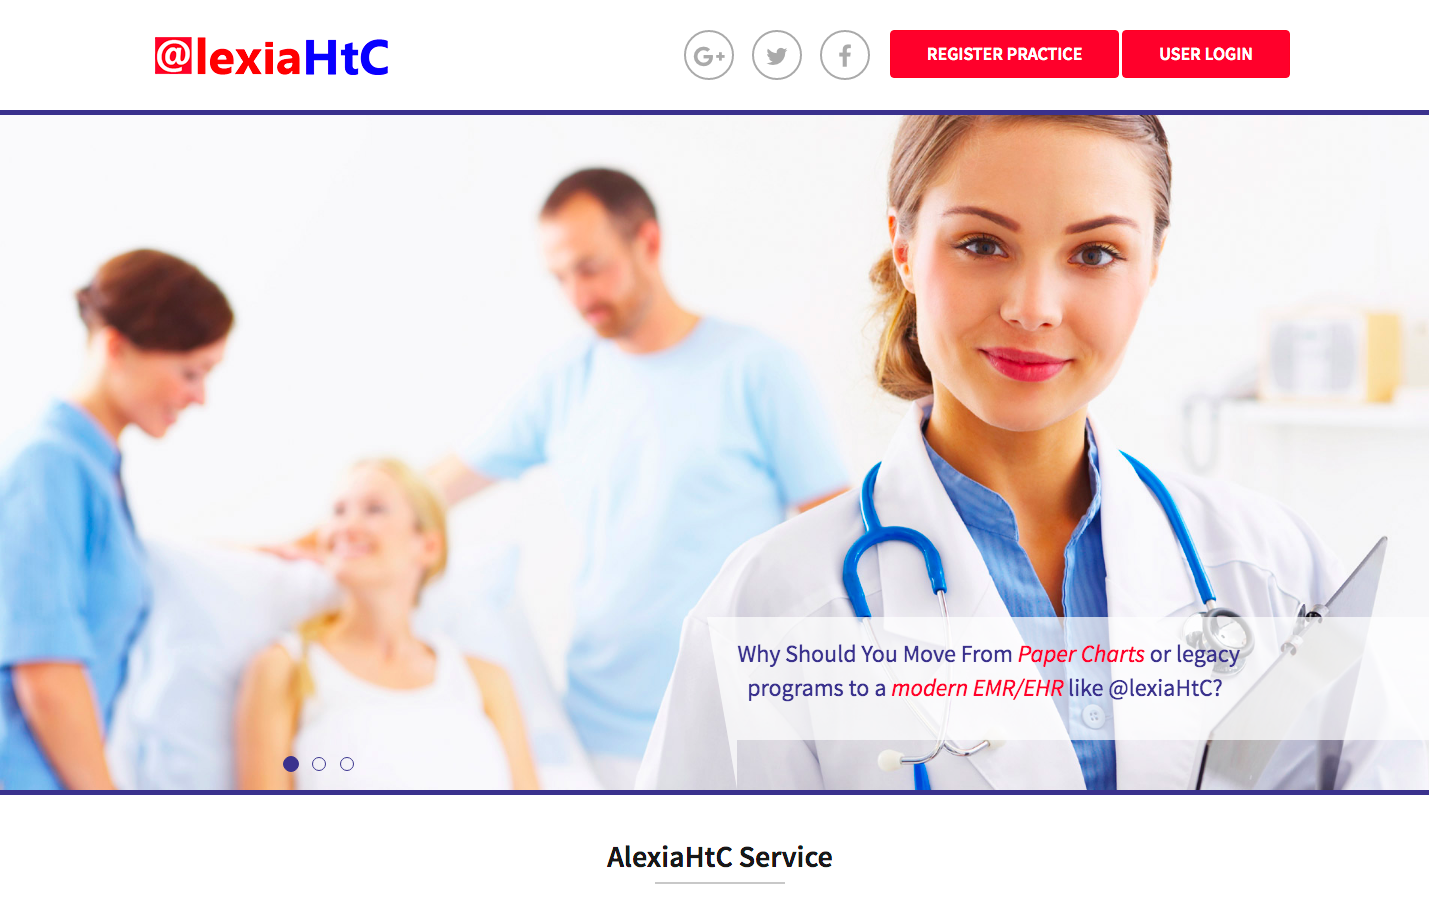 Comcast Corporation Debuts TV Promotion of Alexiacare Corporation’s New Web Application for Medical Doctors